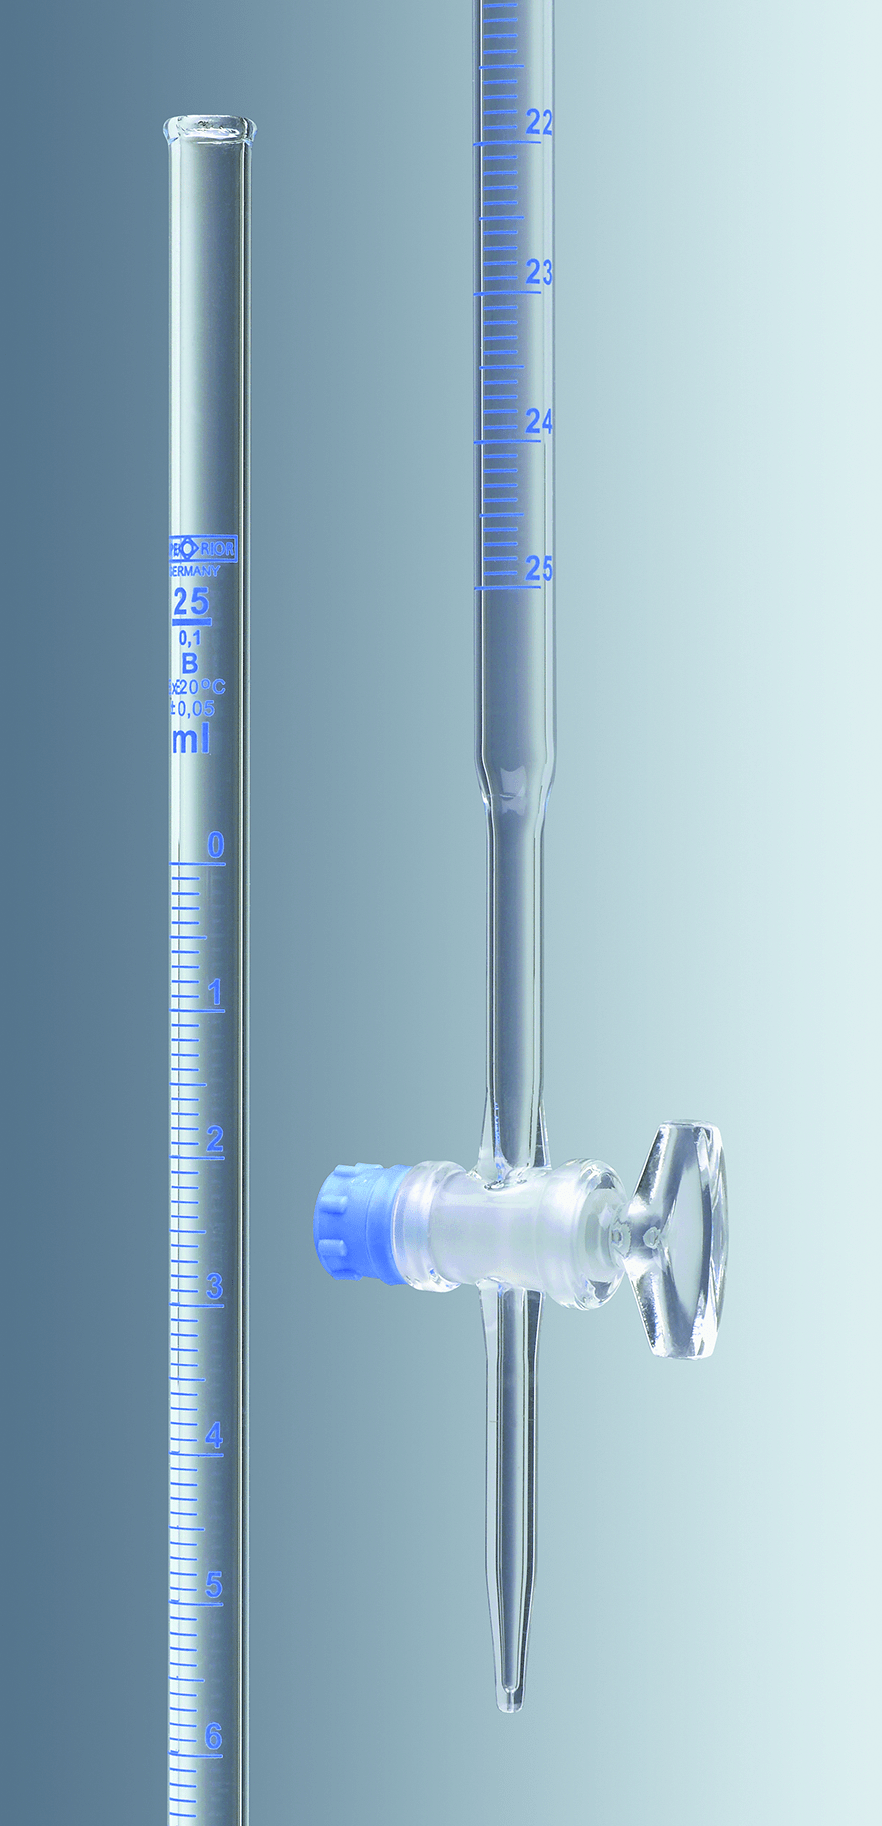 Marienfeld (Germany) Burette 25ml Class AS(Lot Certified)- High quality Borosil.Glass/Pack of 2/S